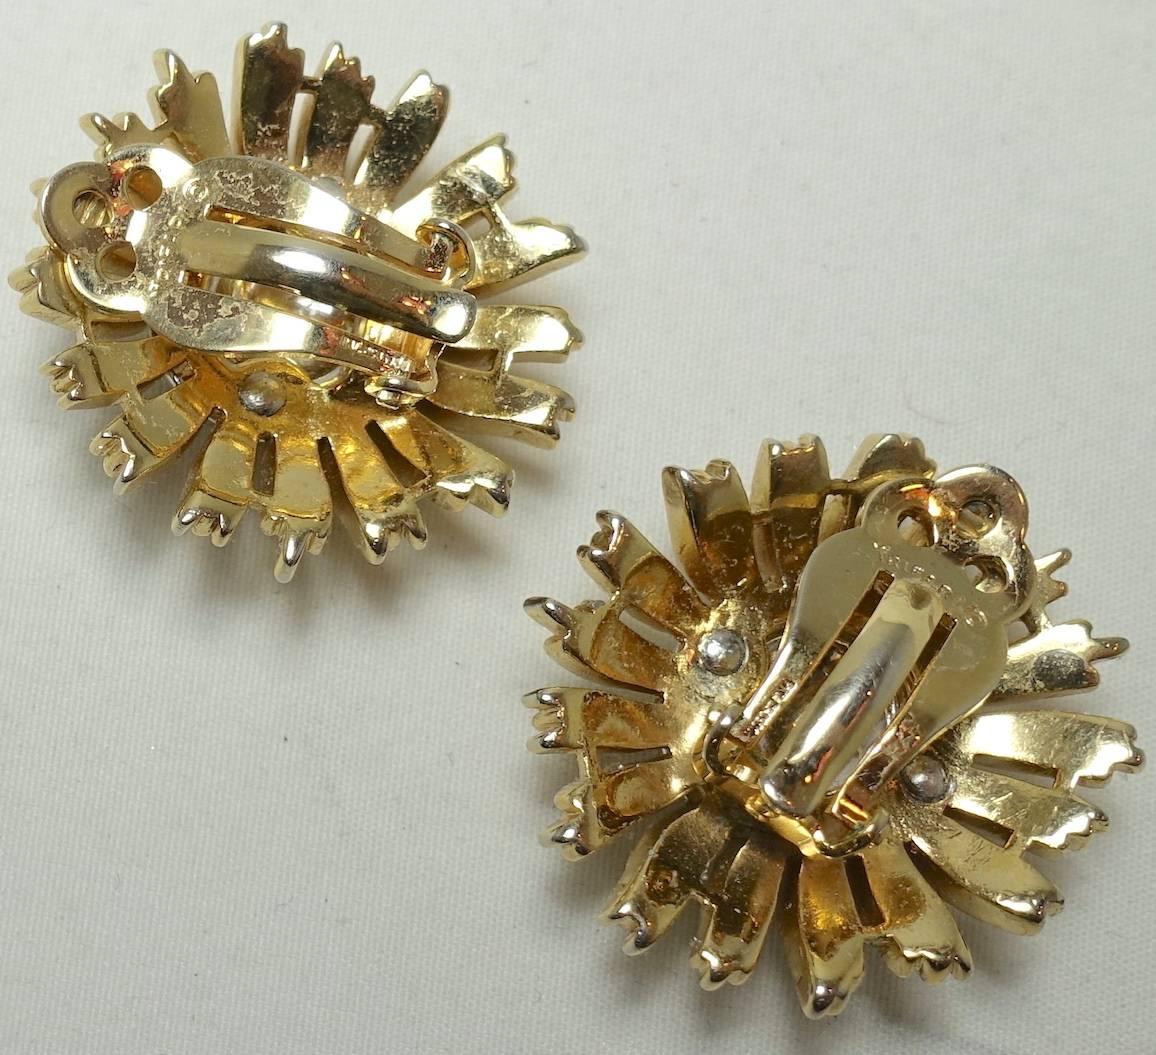 These Trifari 1950s earrings feature clear rhinestones in the center in a floral design. They are in a gold tone setting and measure 1-1/4” x 1-1/4” and are signed “Trifari”. They are in excellent condition.